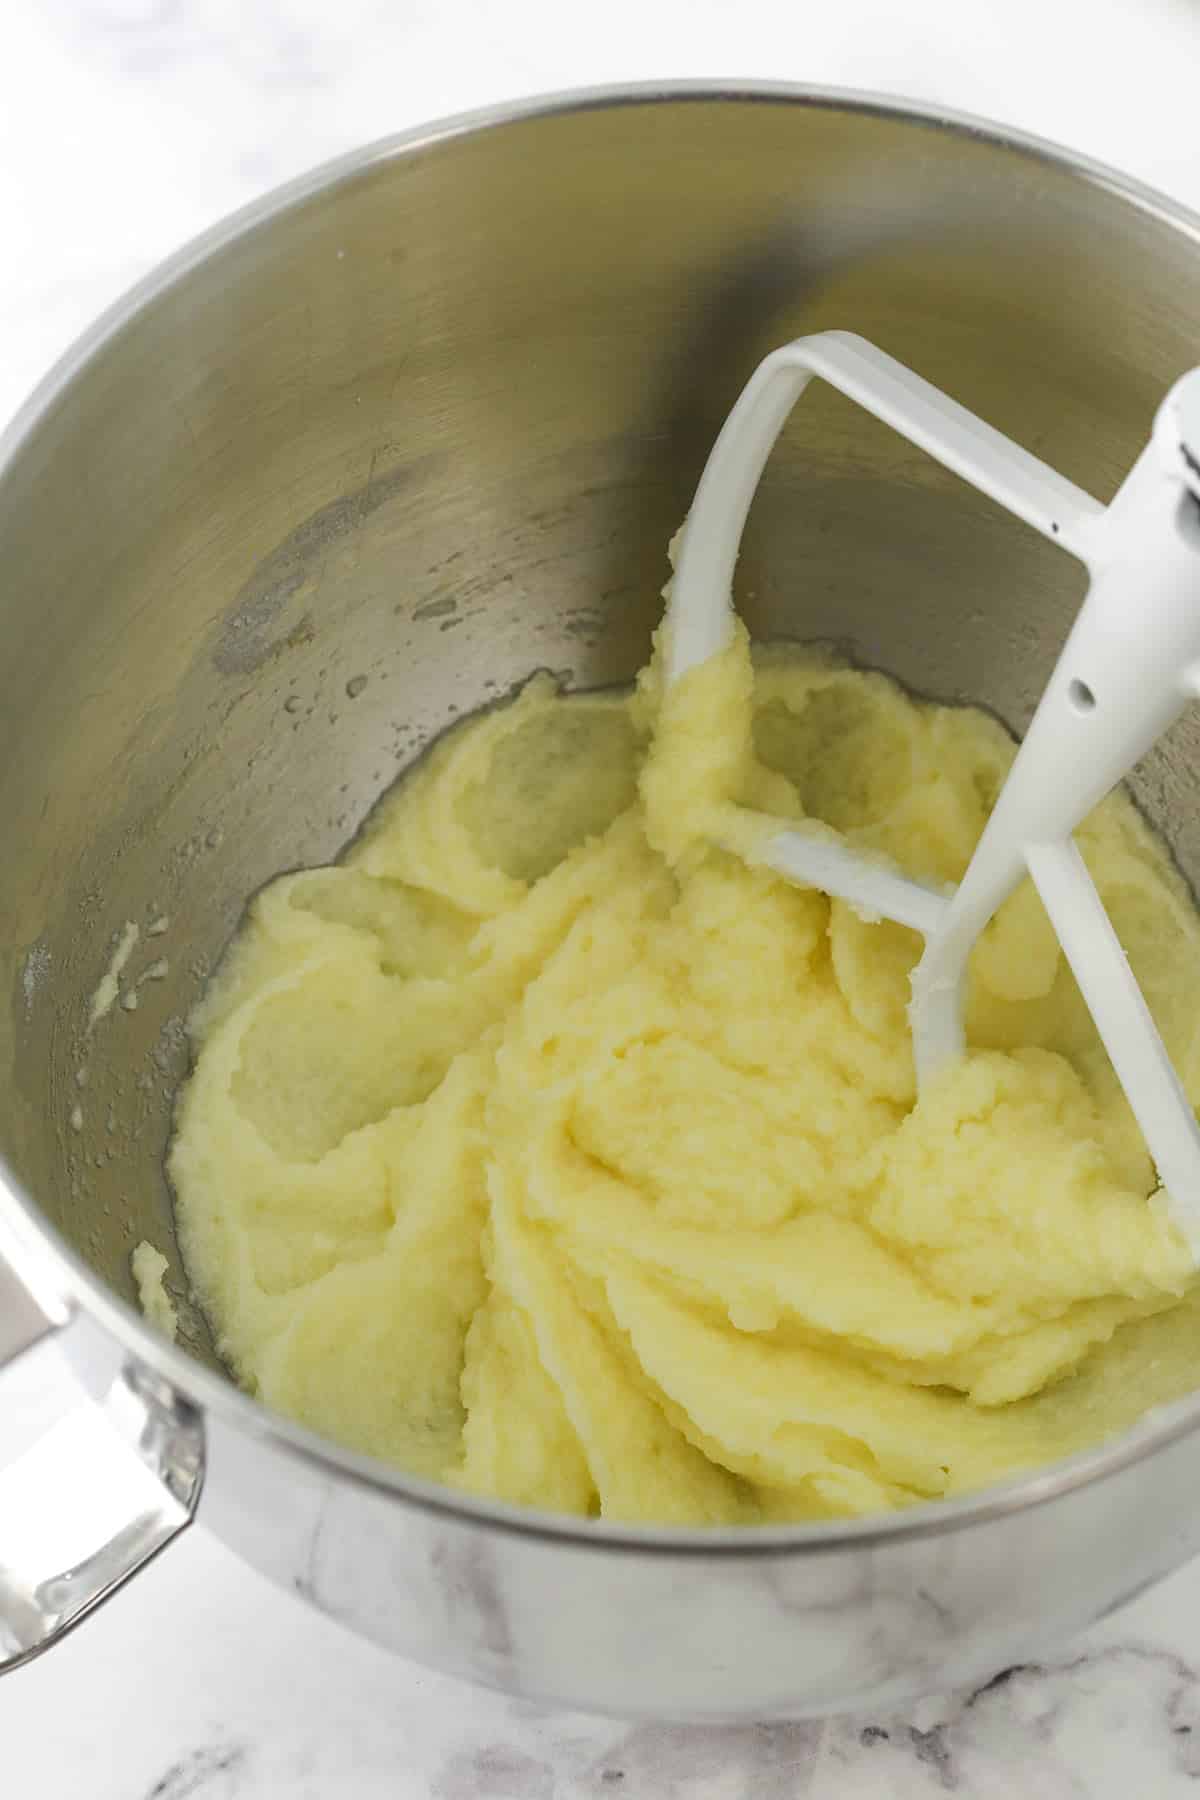 The creamed butter and sugar mixture after the eggs have been mixed in